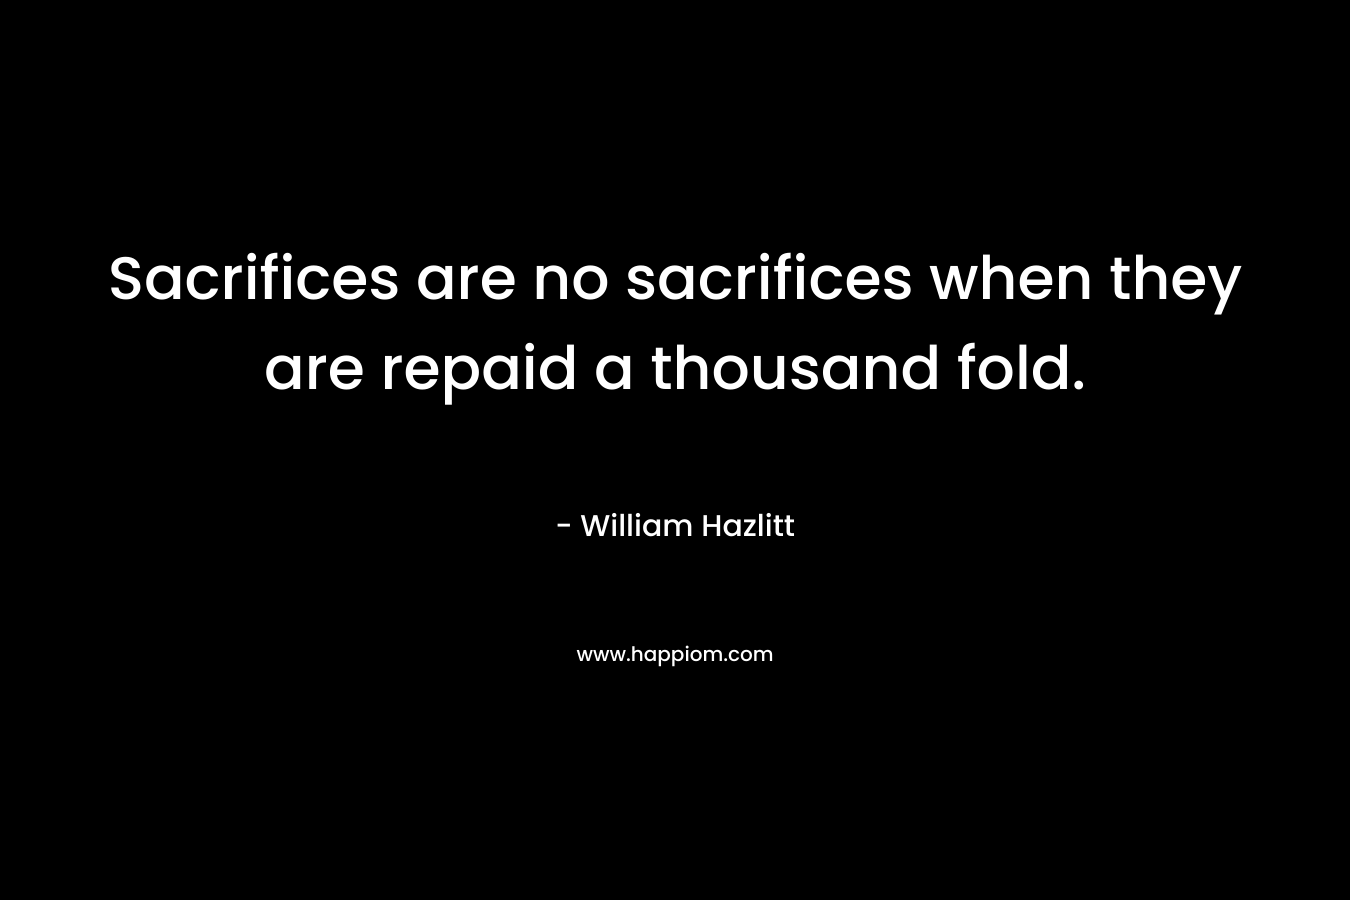 Sacrifices are no sacrifices when they are repaid a thousand fold.